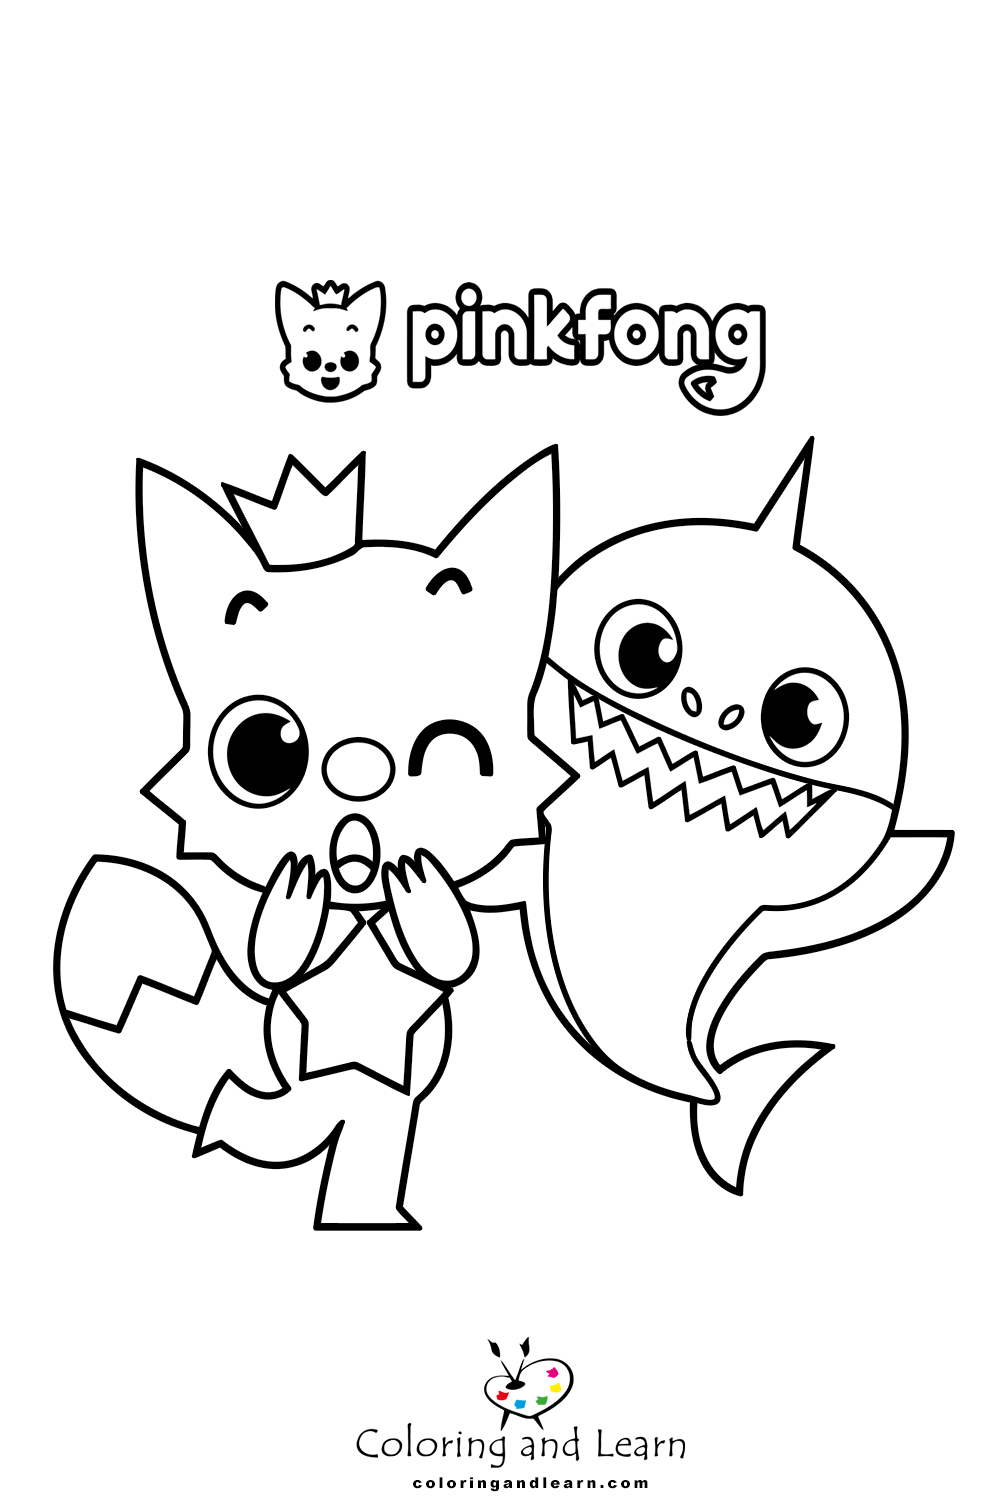 baby shark cartoon coloring pages